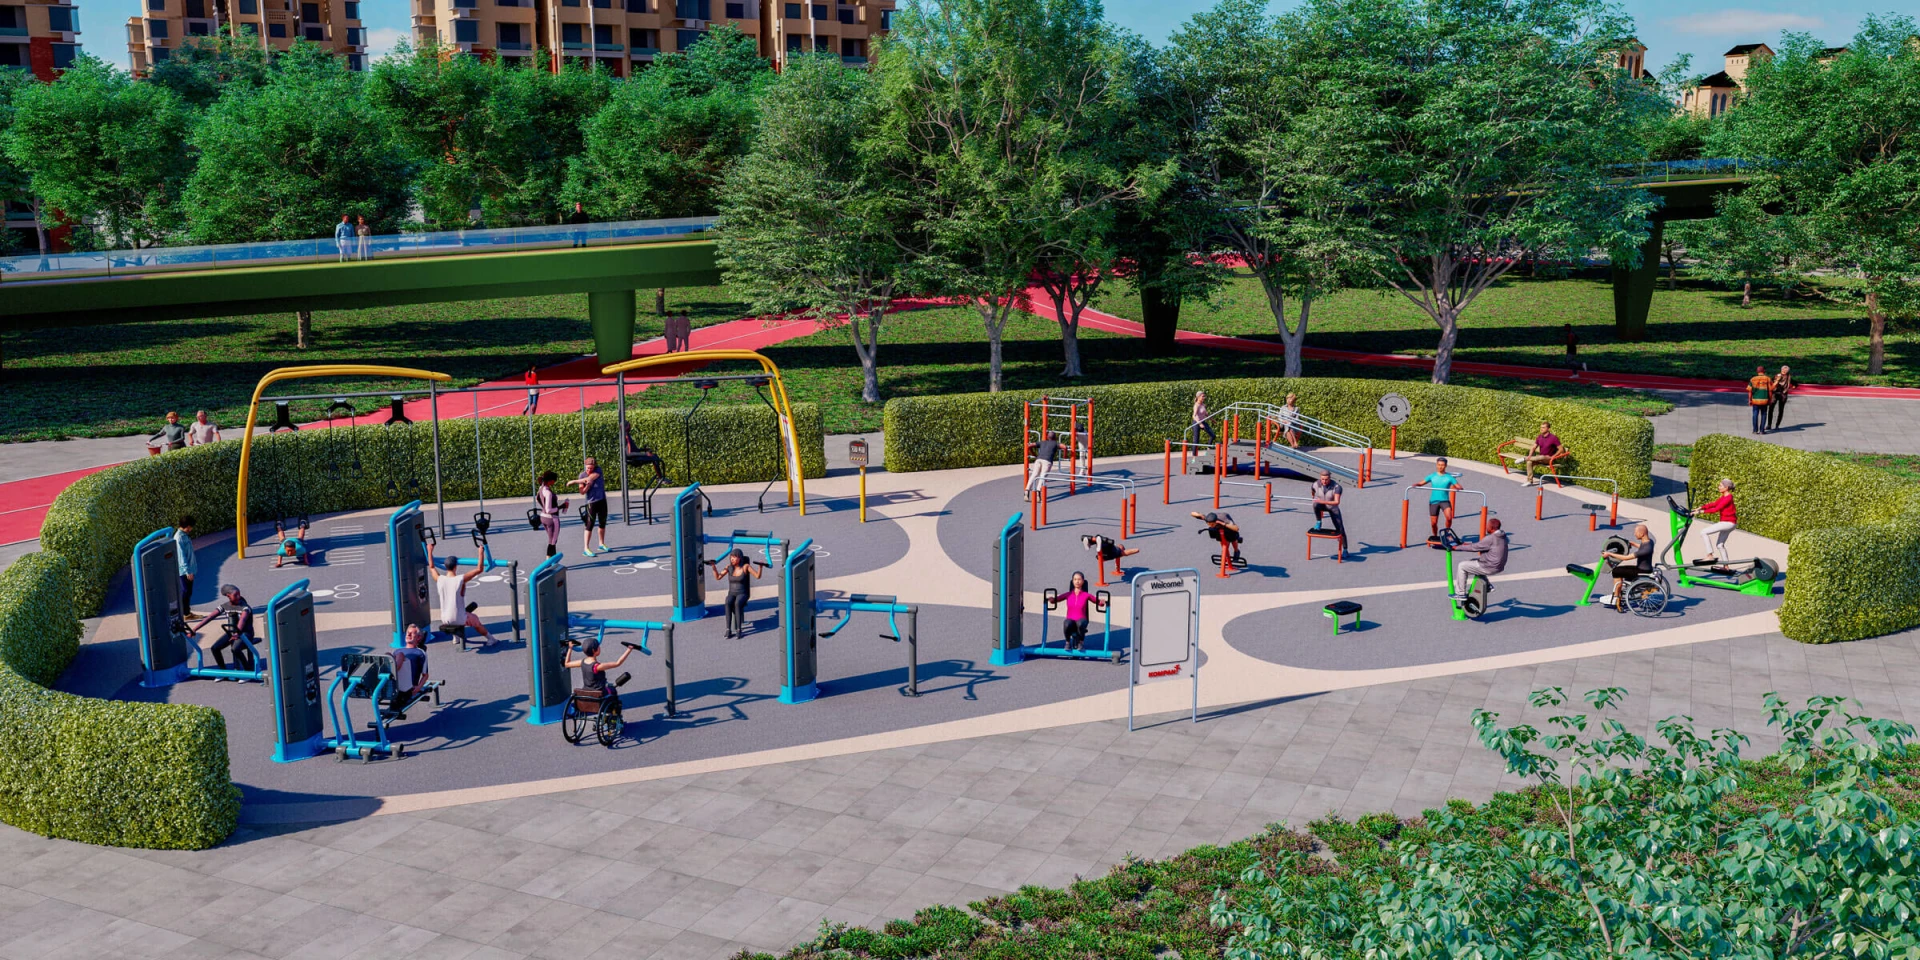 Design inspiration for an outdoor inclusive fitness area